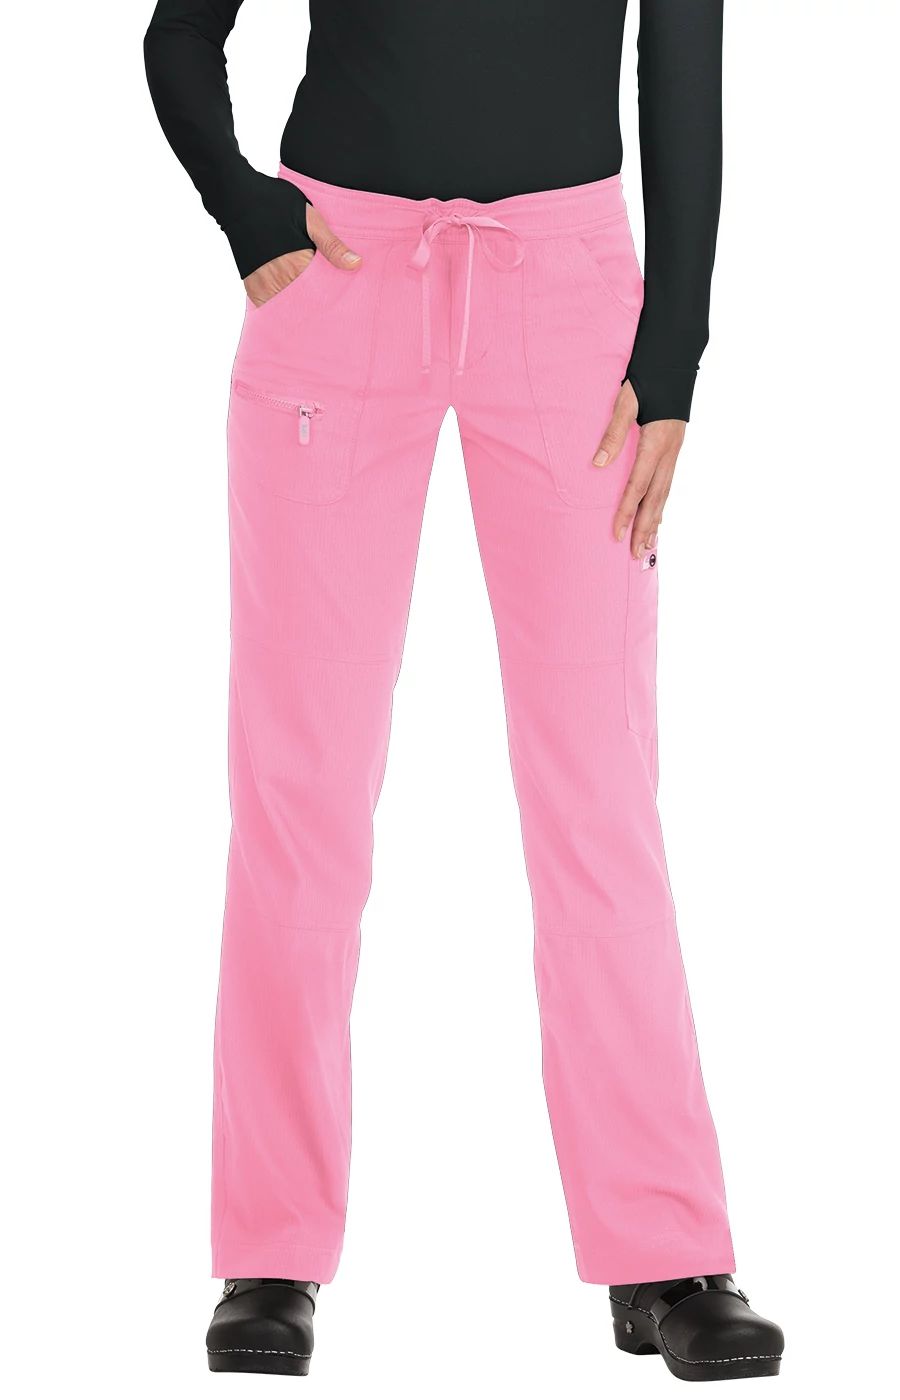 peace-pant-more-pink